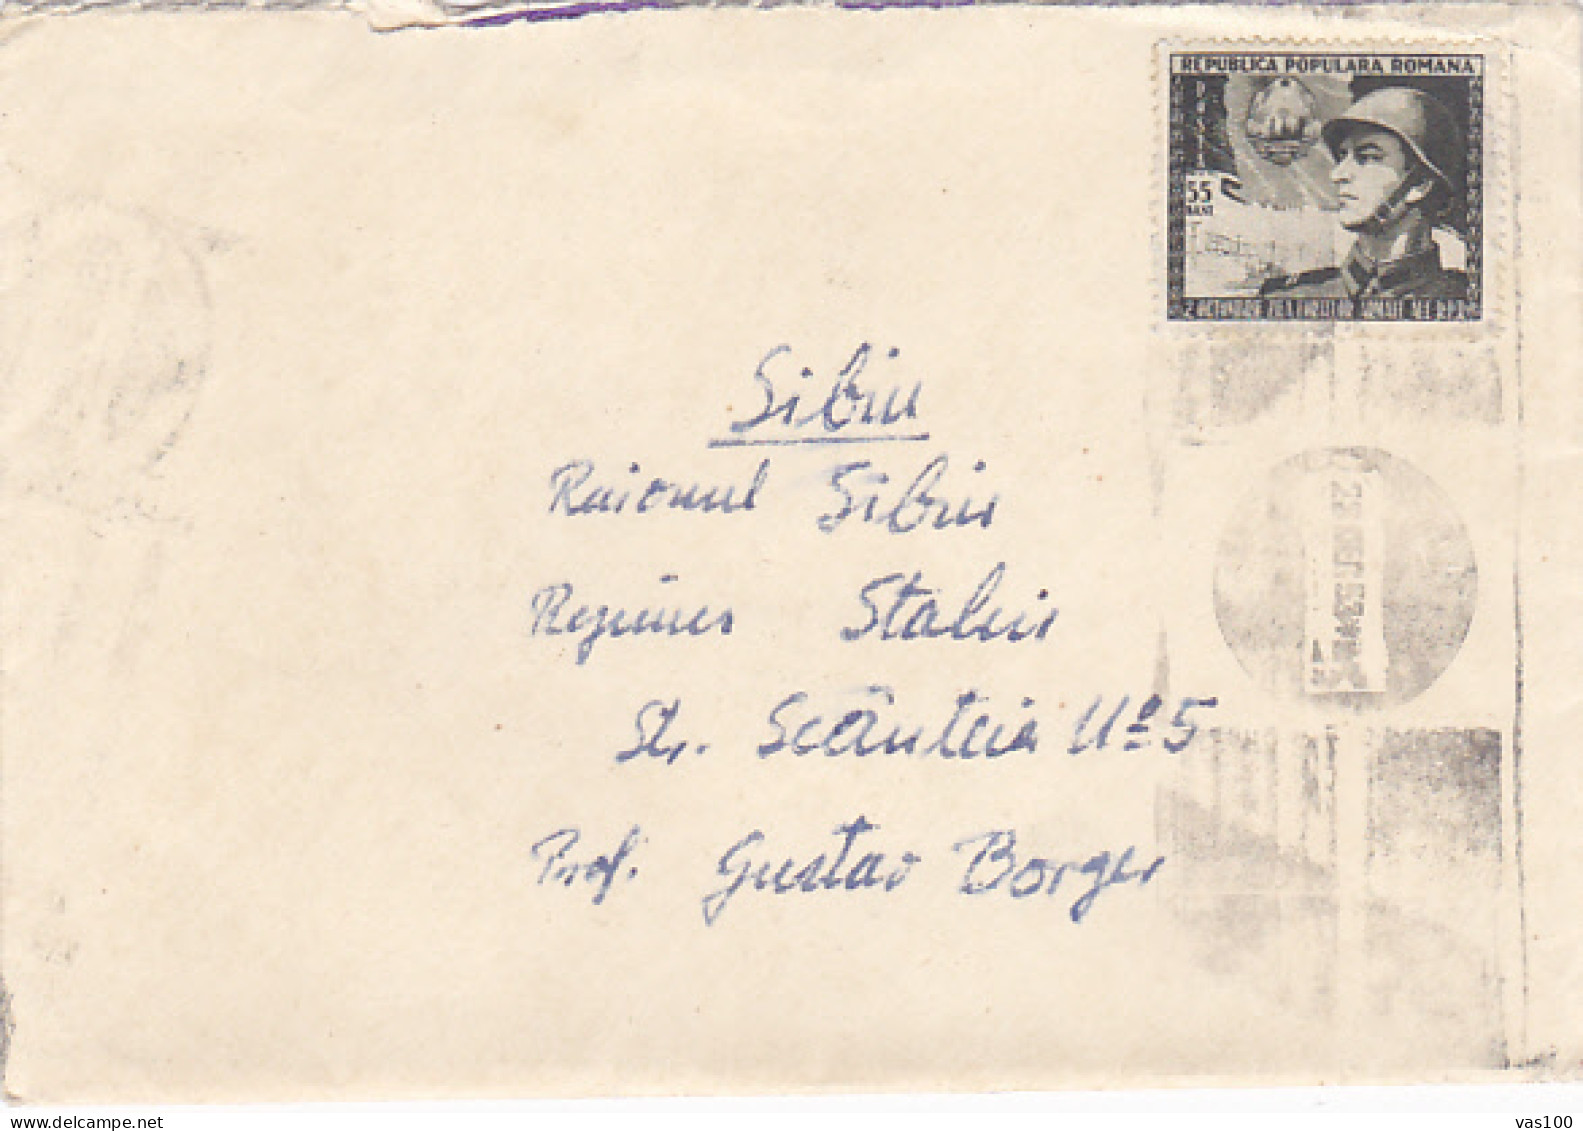 ARMY DAY, SOLDIER, STAMP ON COVER, 1953, ROMANIA - Briefe U. Dokumente